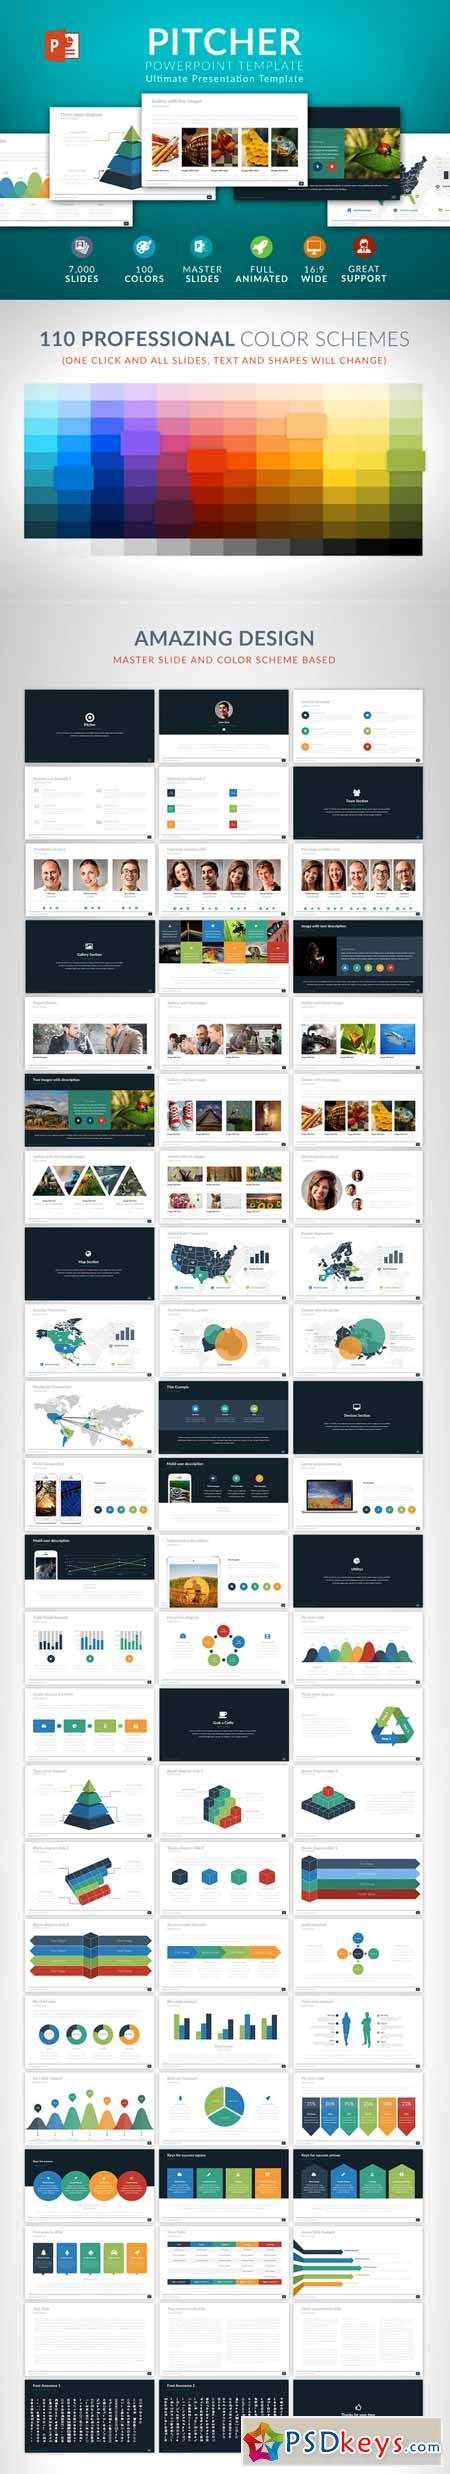 Pitcher Powerpoint template 489507